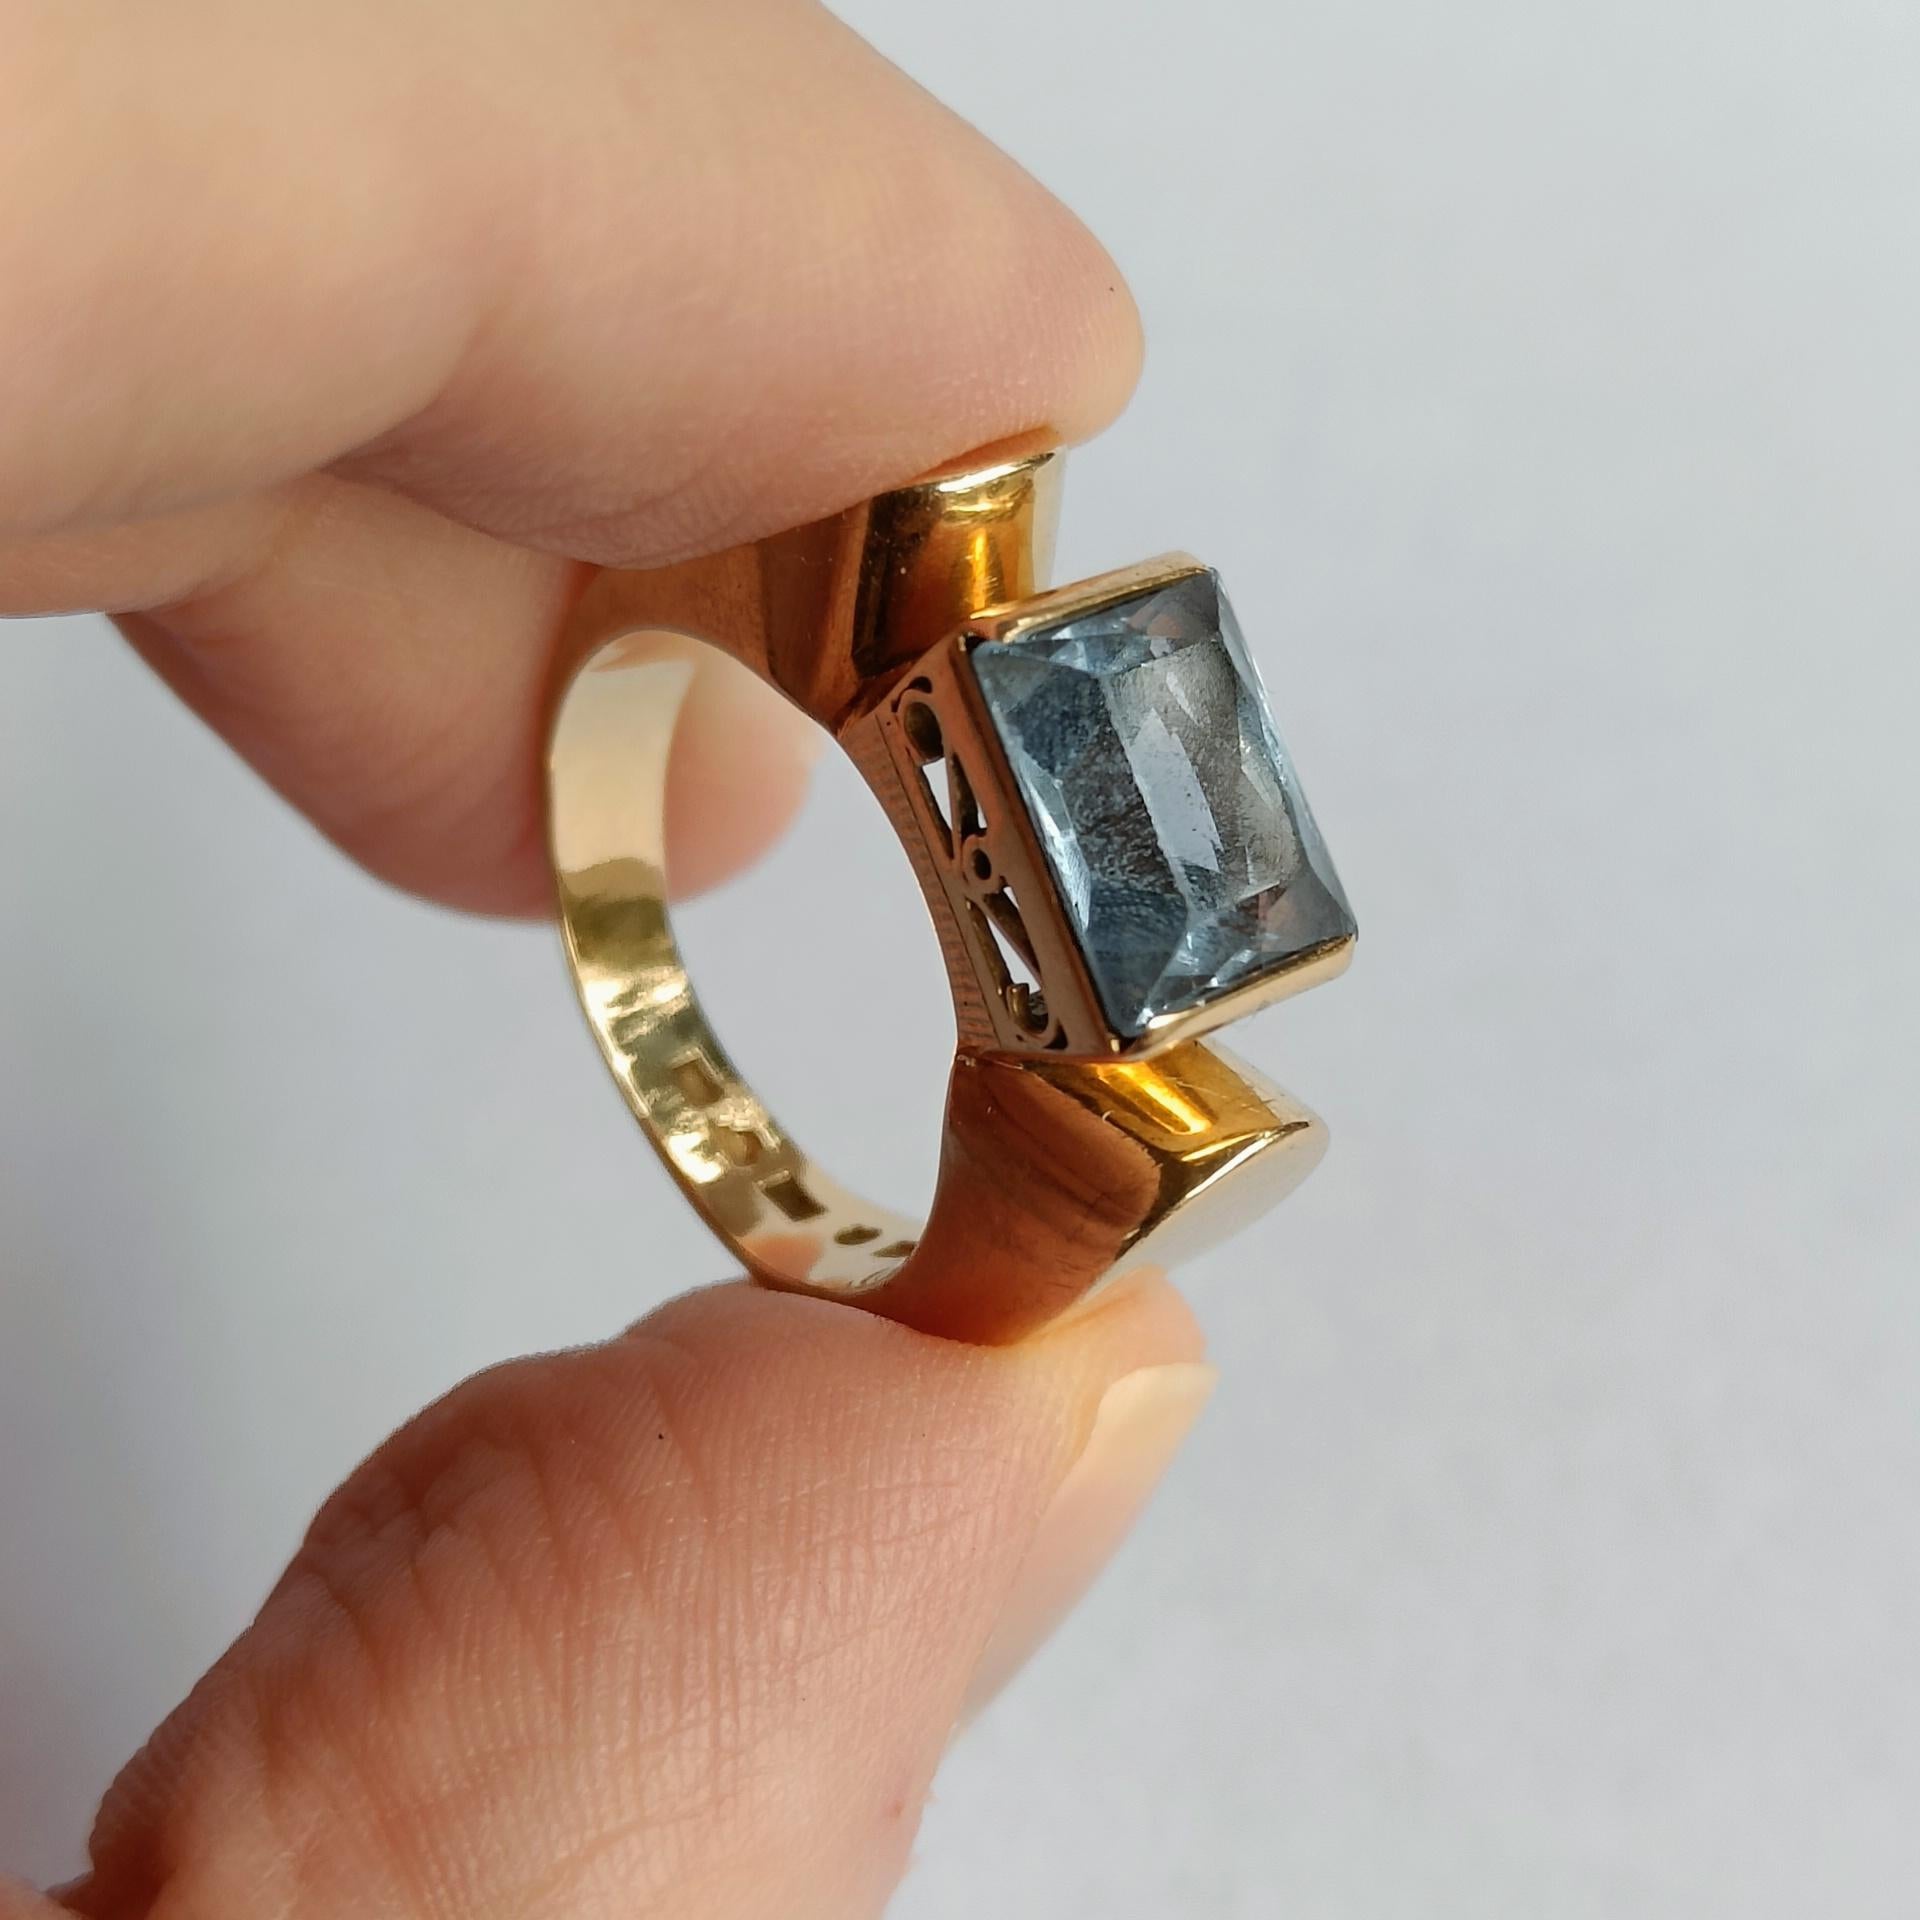 Chunky Art Deco 18k Gold Ring with Aquamarine - Sweden 1940s For Sale 8